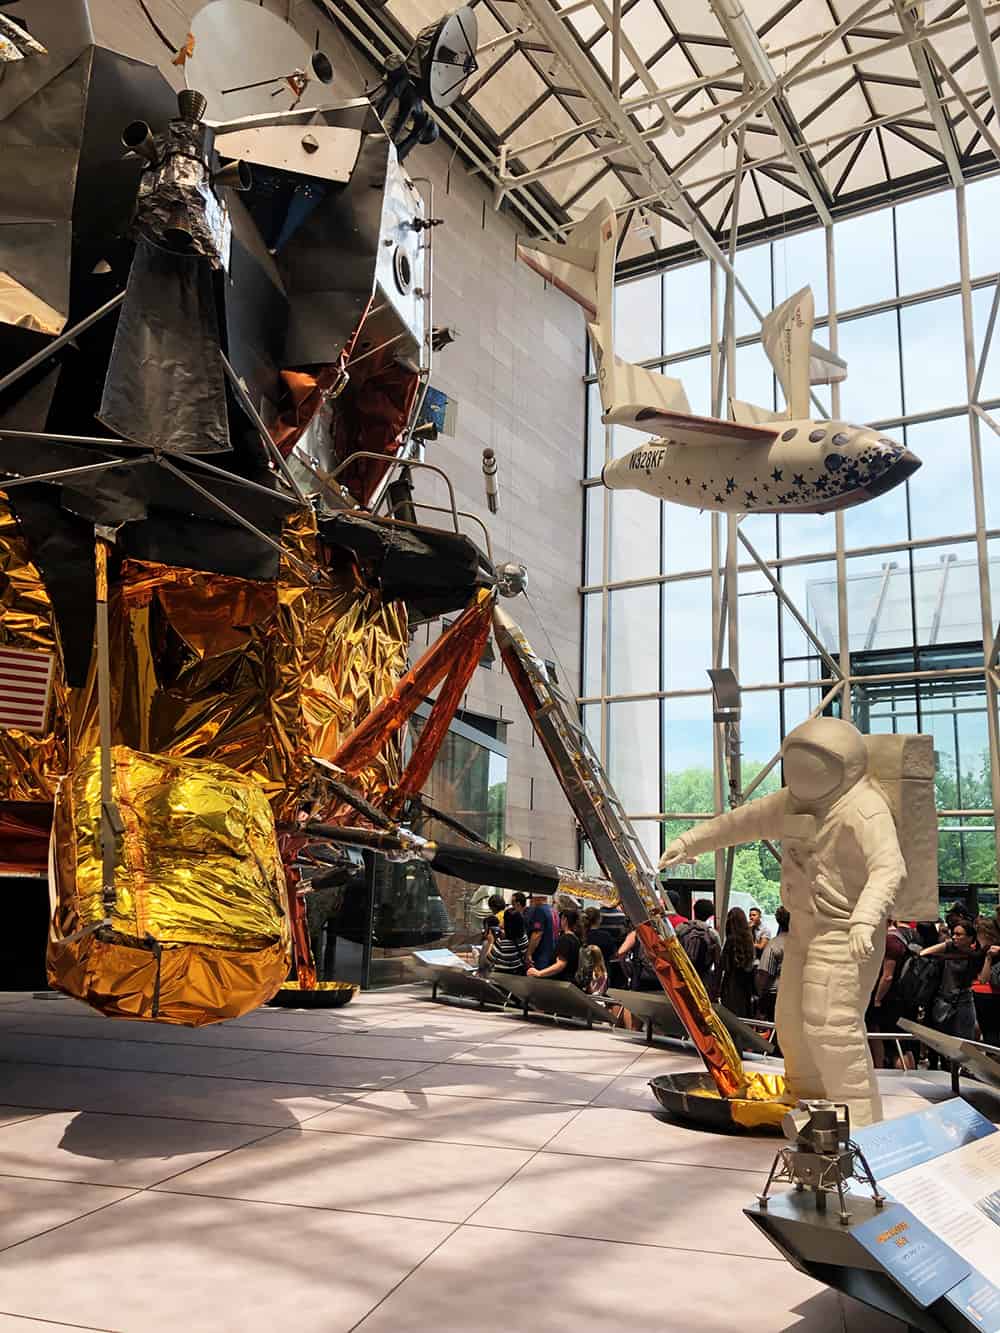 Smithsonian National Air and Space Museum in Washington DC | where we have visited in DC + our DC bucket list for the future | via Autumn All Along